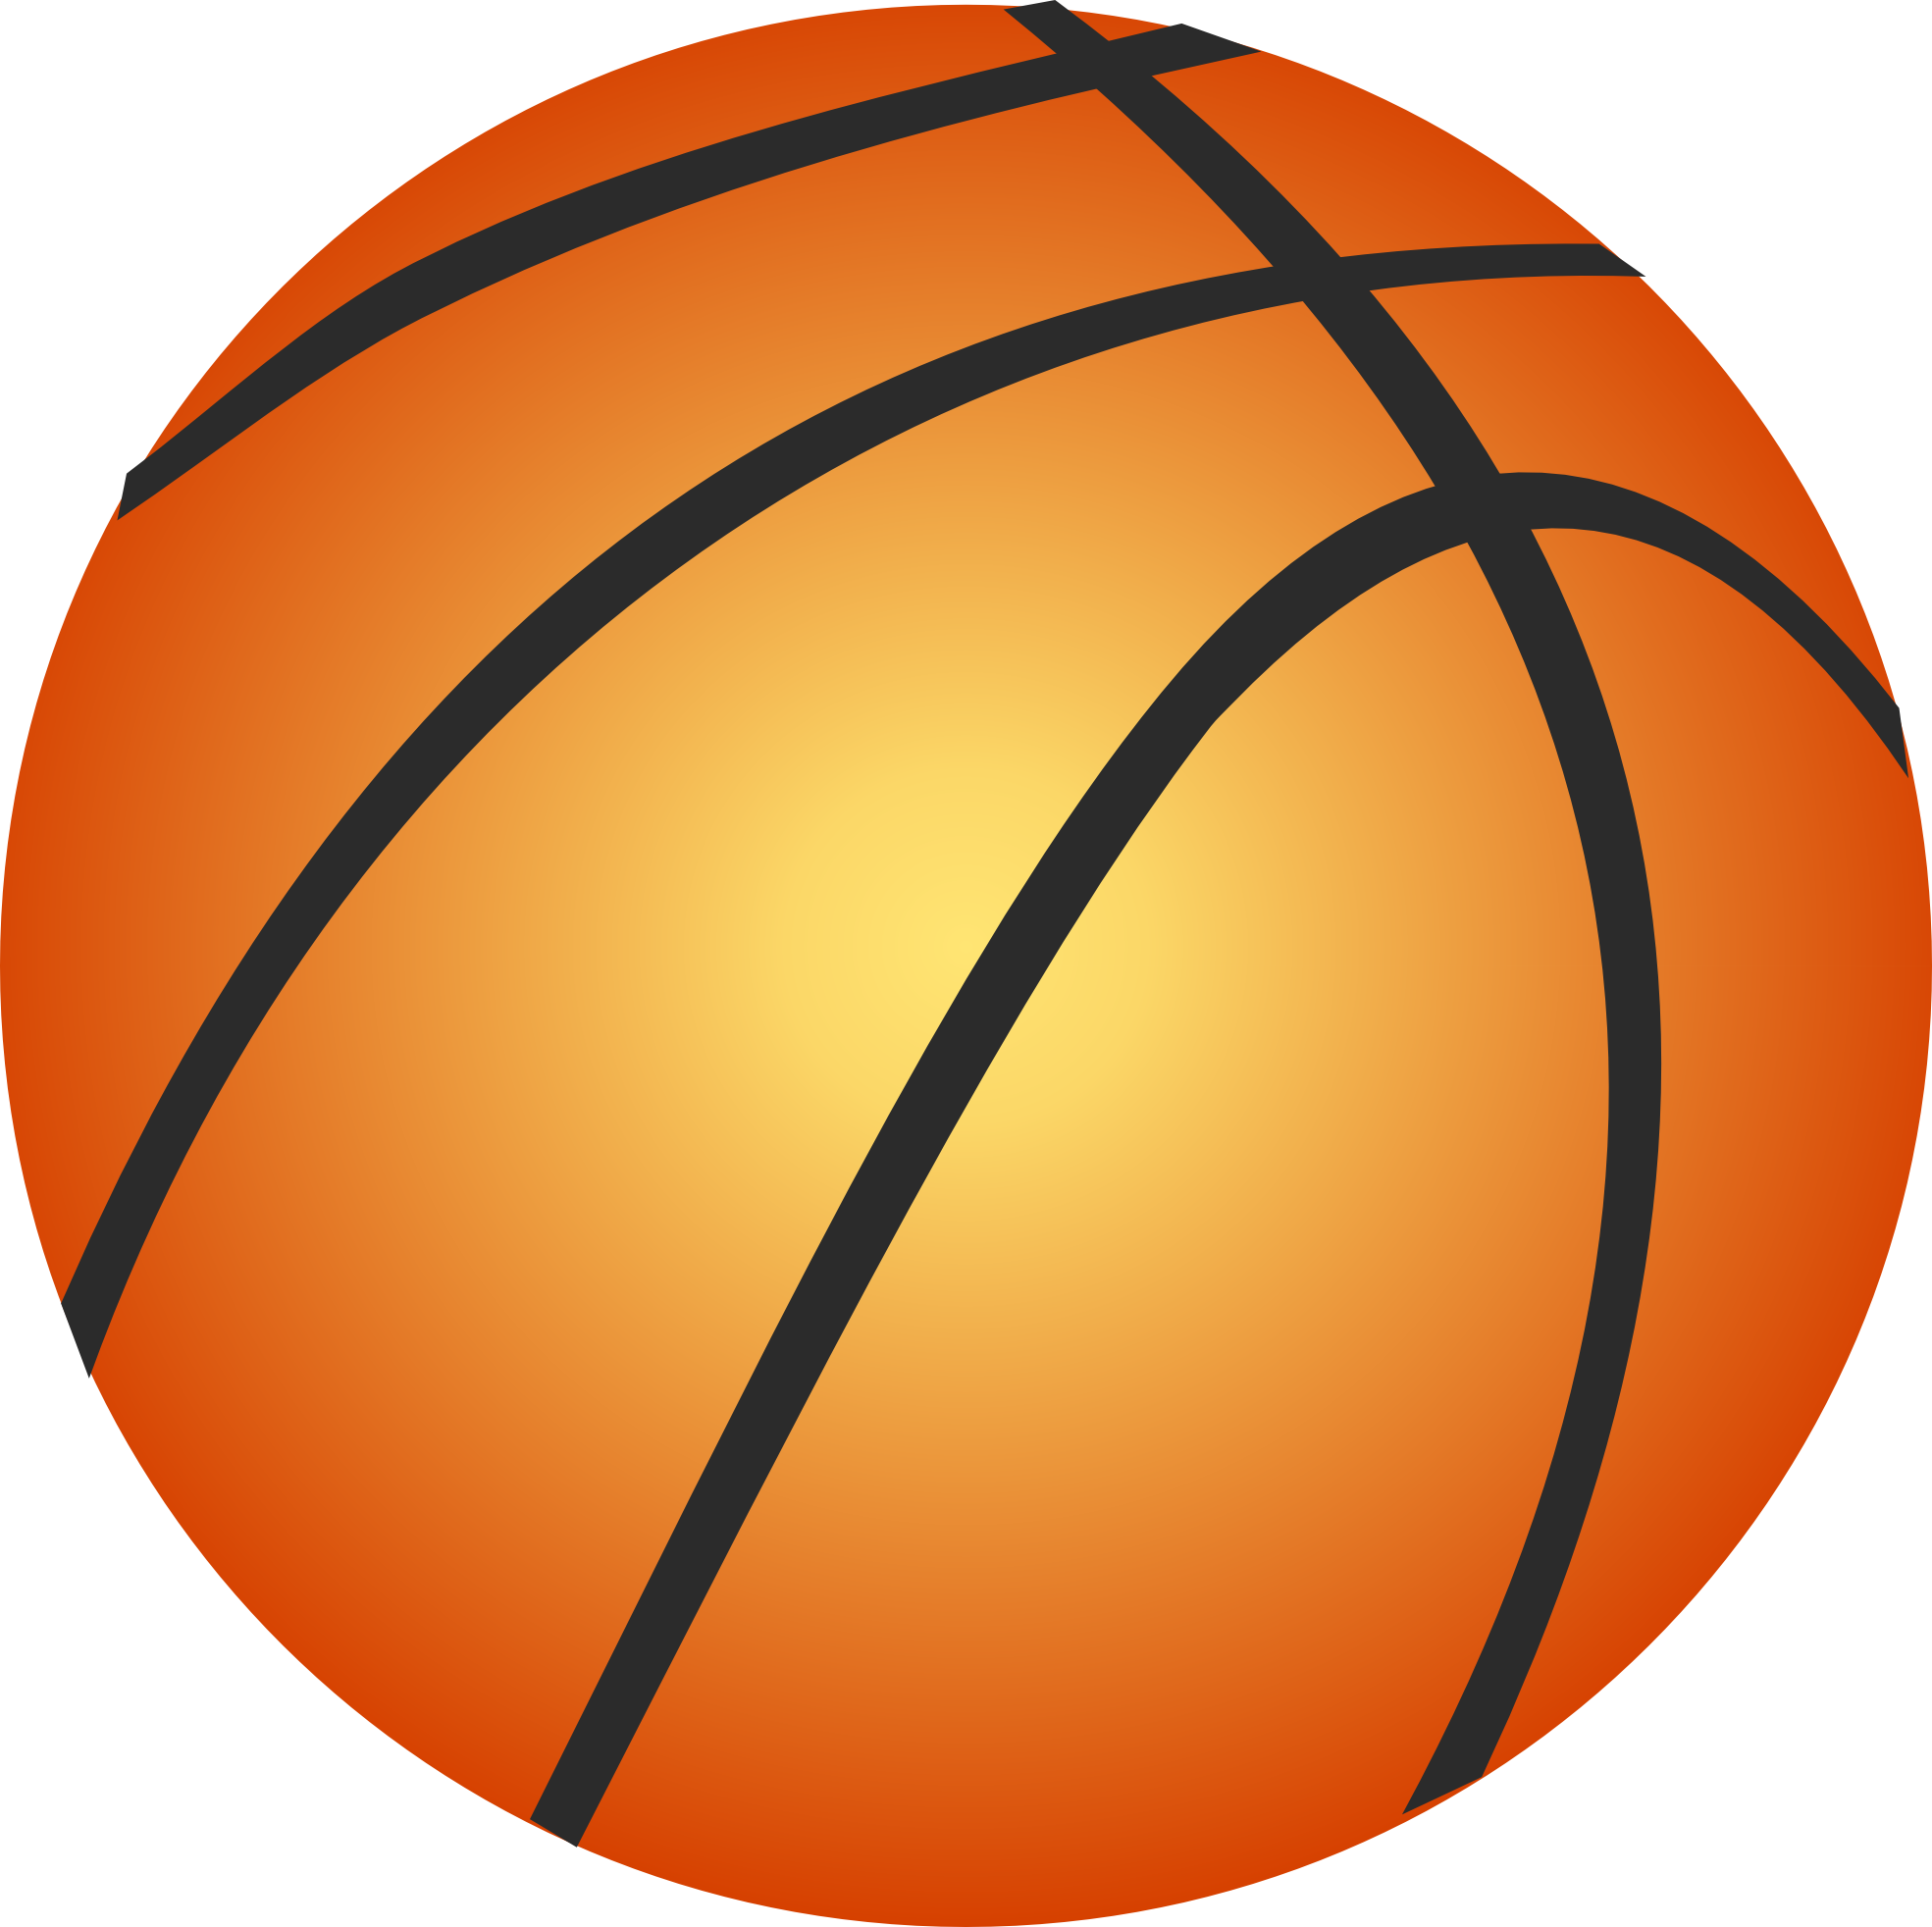 Basketball Clip Art Images & Pictures - Becuo